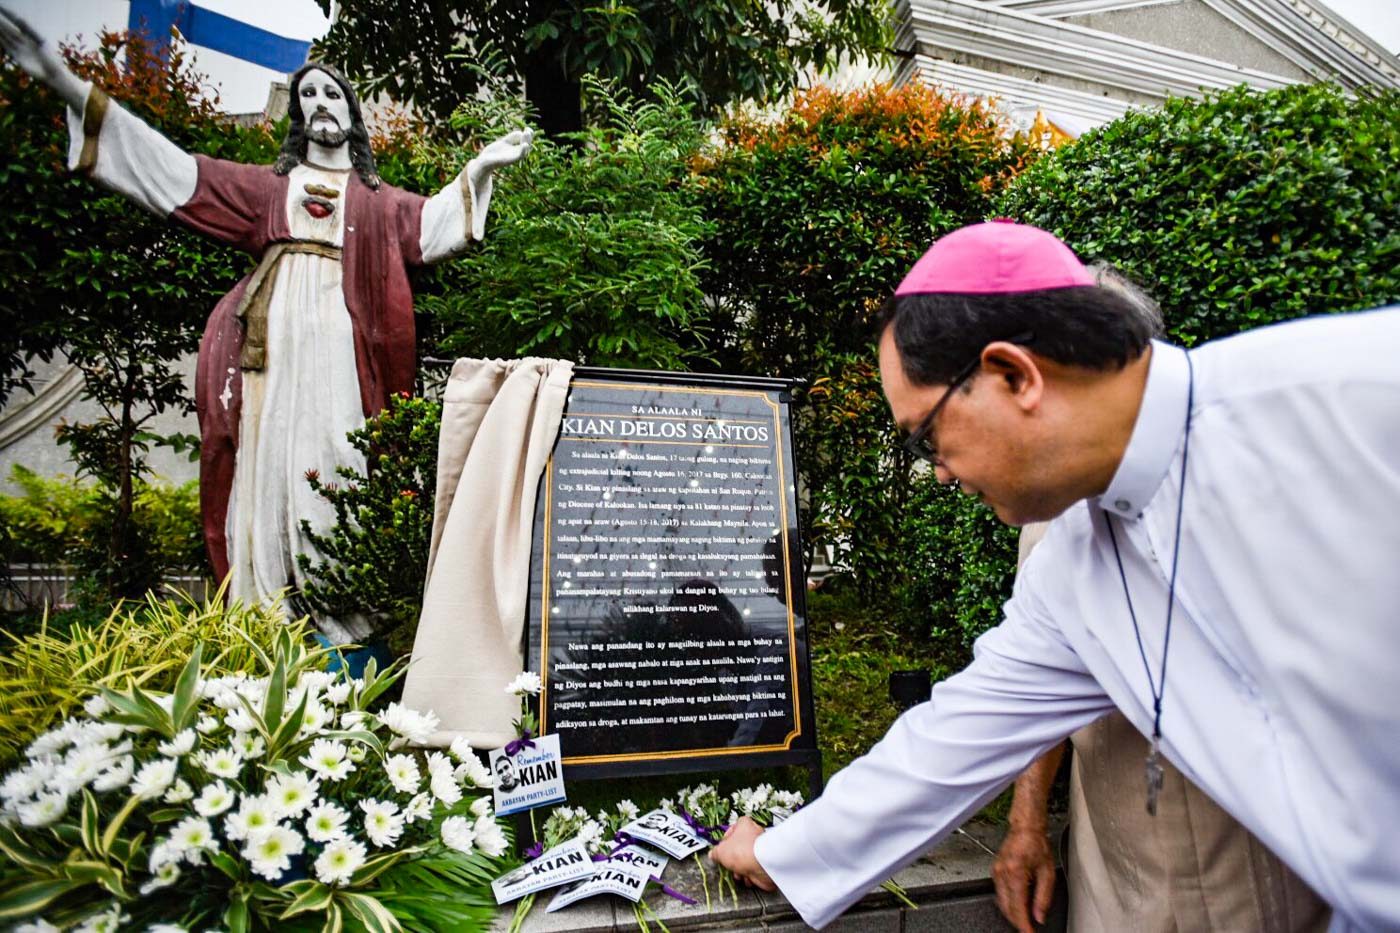 Kian memorial is for all EJK victims, too